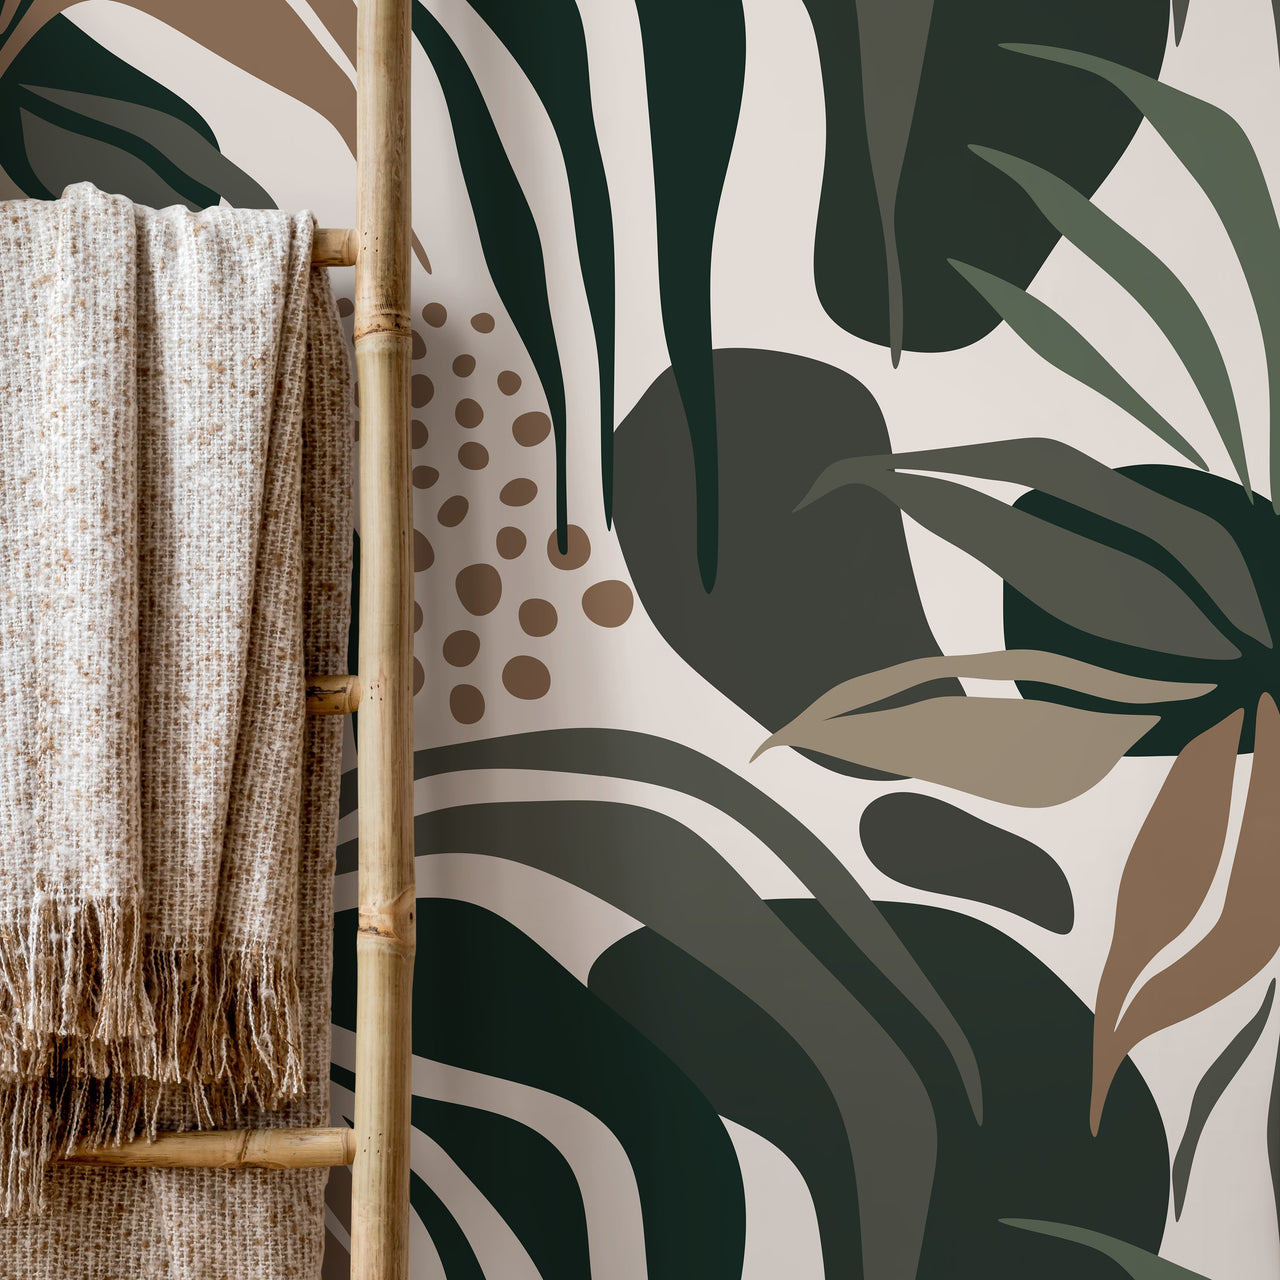 Tropical Abstract Wallpaper Modern Wallpaper Peel and Stick and Traditional Wallpaper - D711